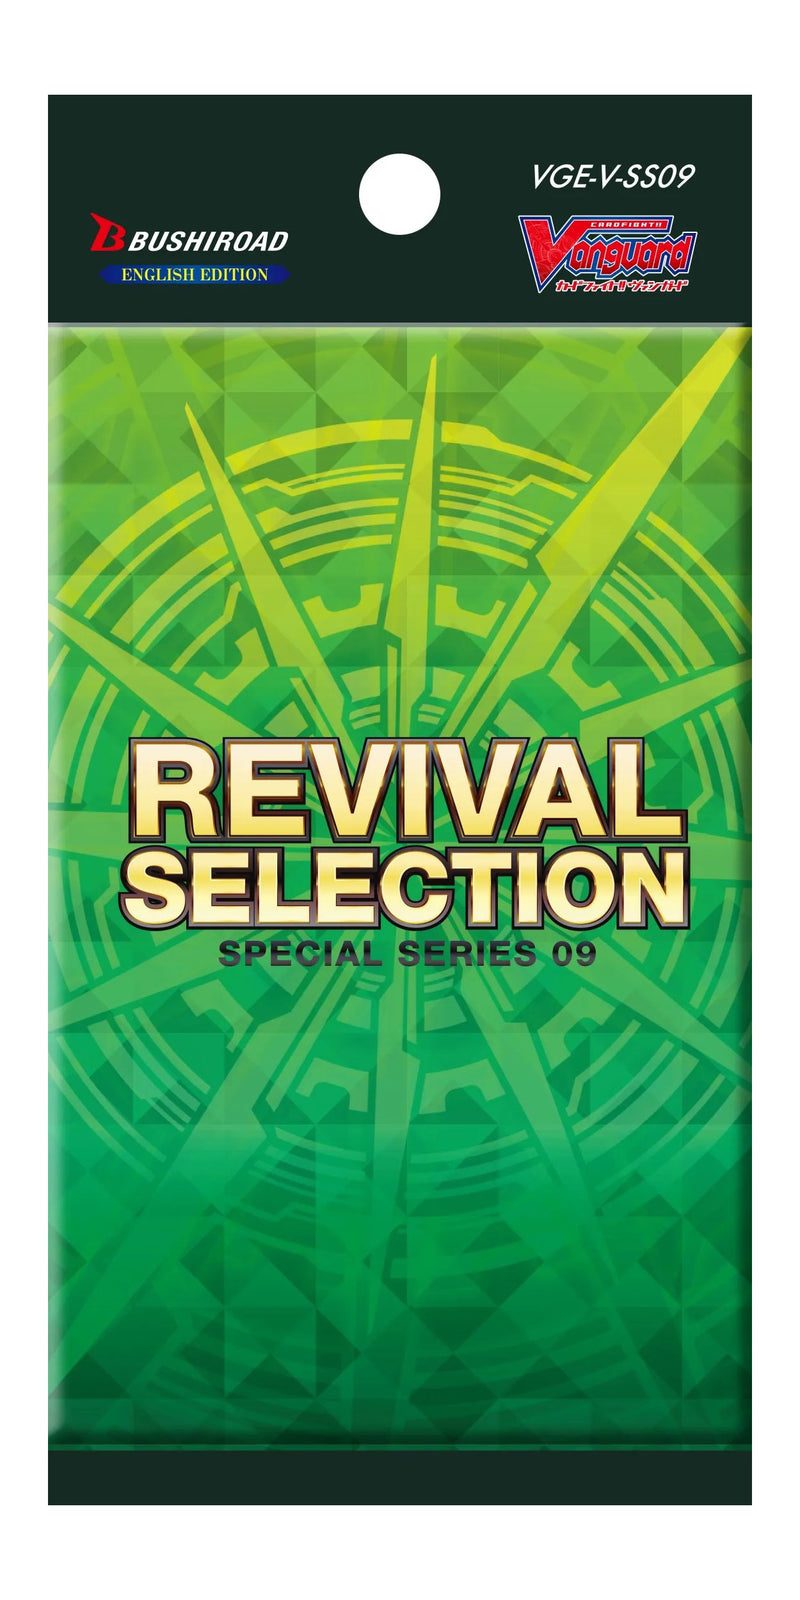 Cardfight!! Vanguard Revival Selection Special Series 09